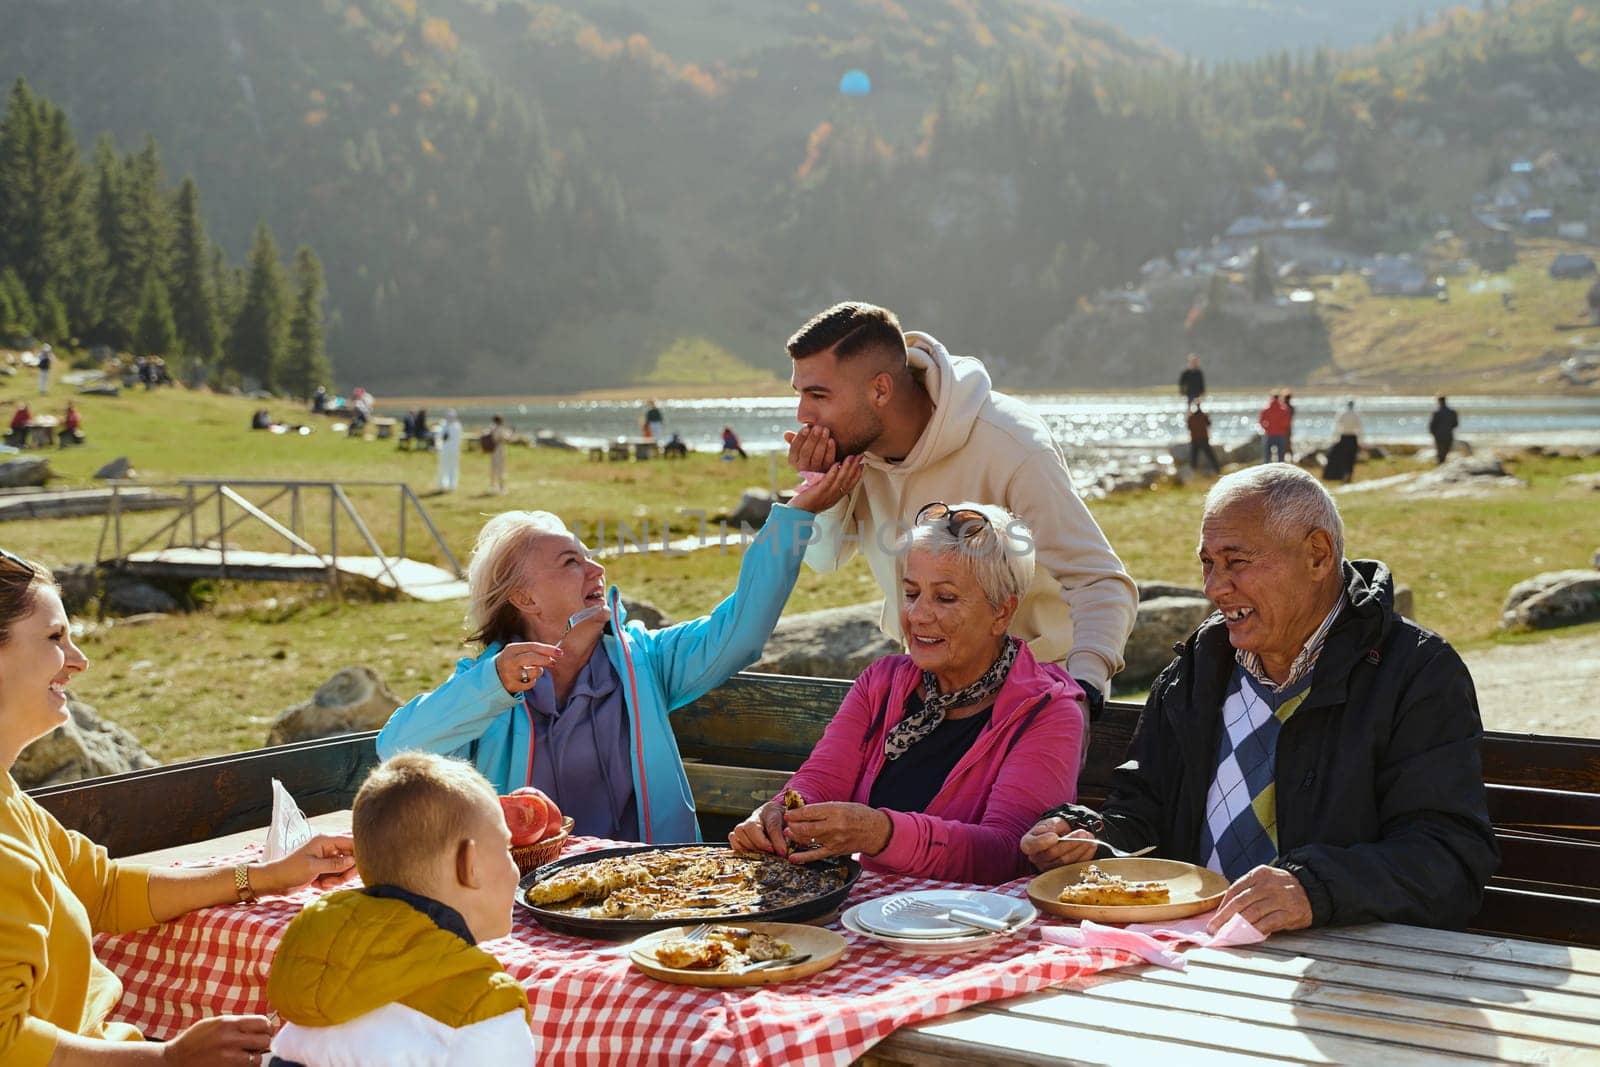 A family on a mountain vacation indulges in the pleasures of a healthy life, savoring traditional pie while surrounded by the breathtaking beauty of nature, fostering family bonds and embracing the vitality of their mountain retreat.